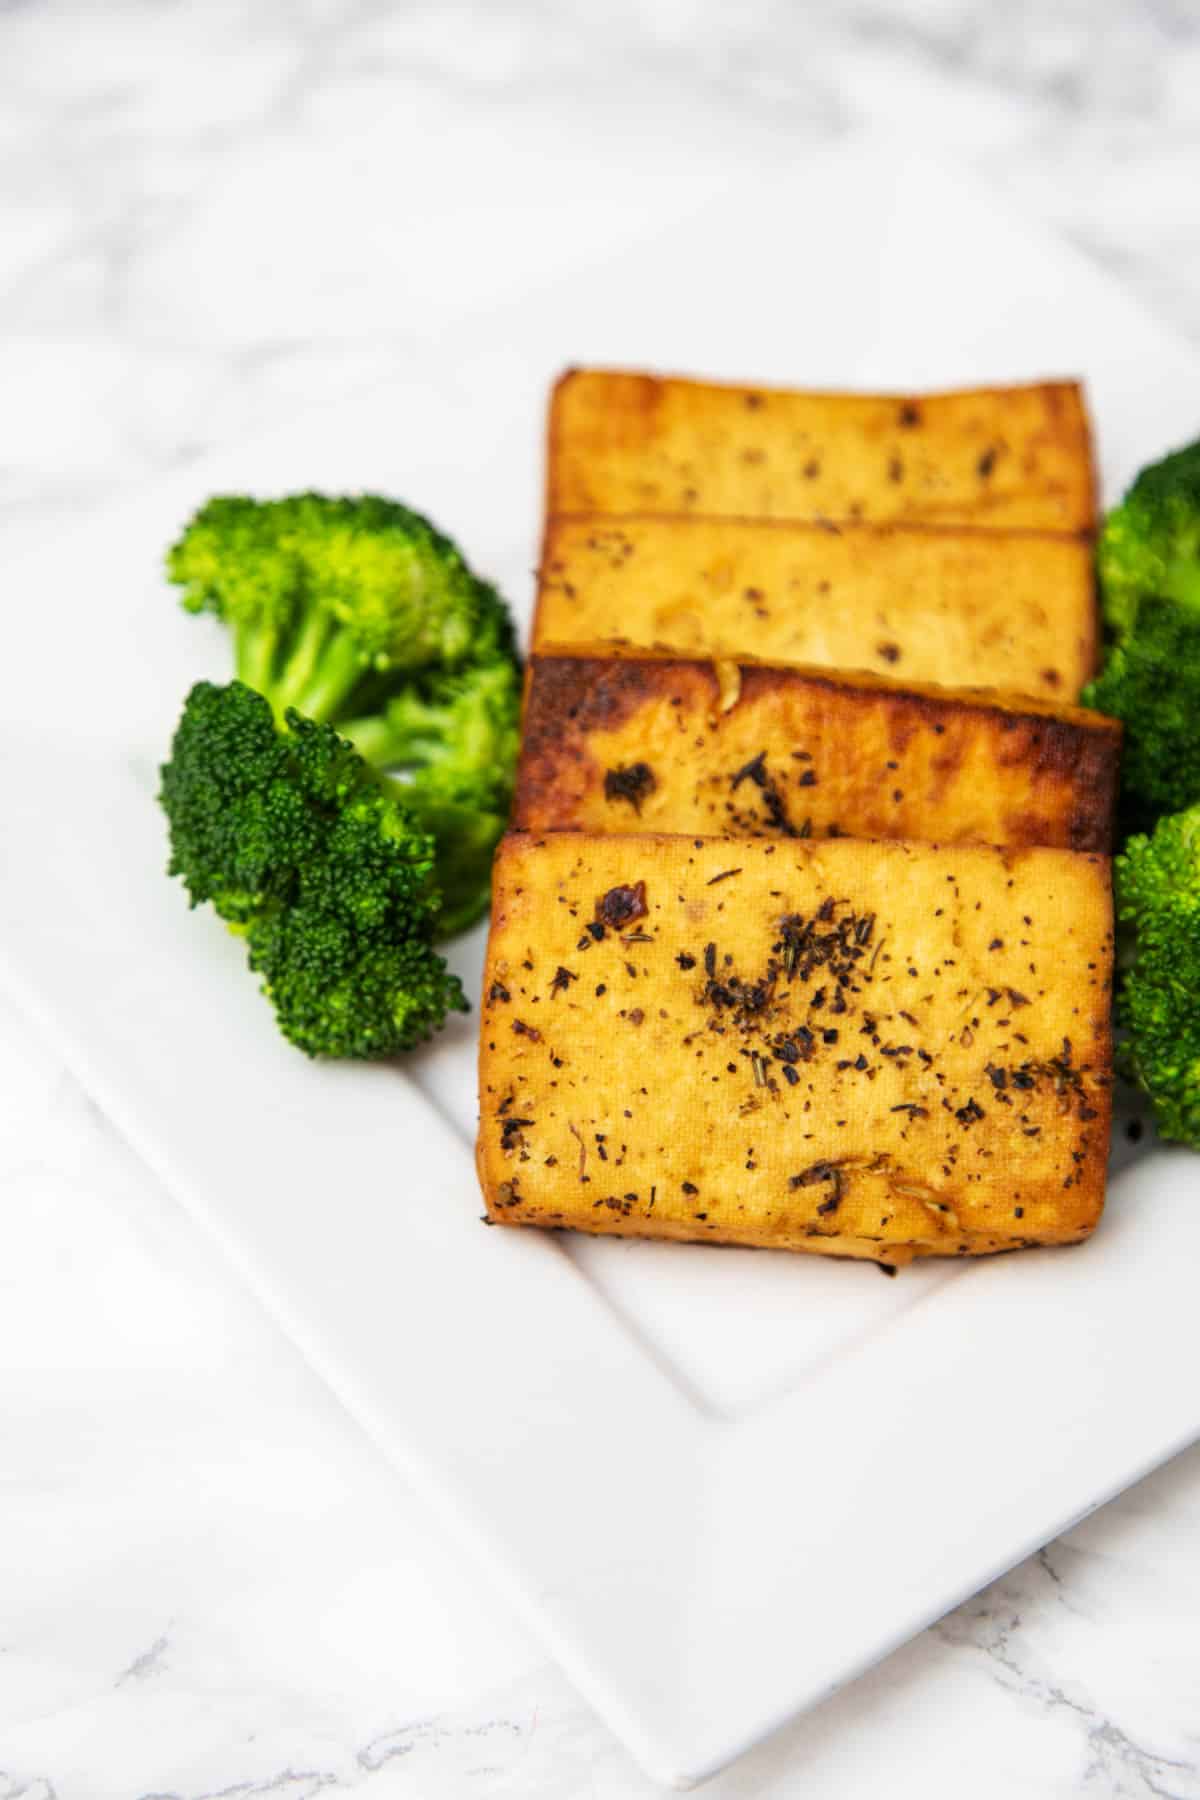 Close up photo of 4 slices of baked tofu on plate with broccoli